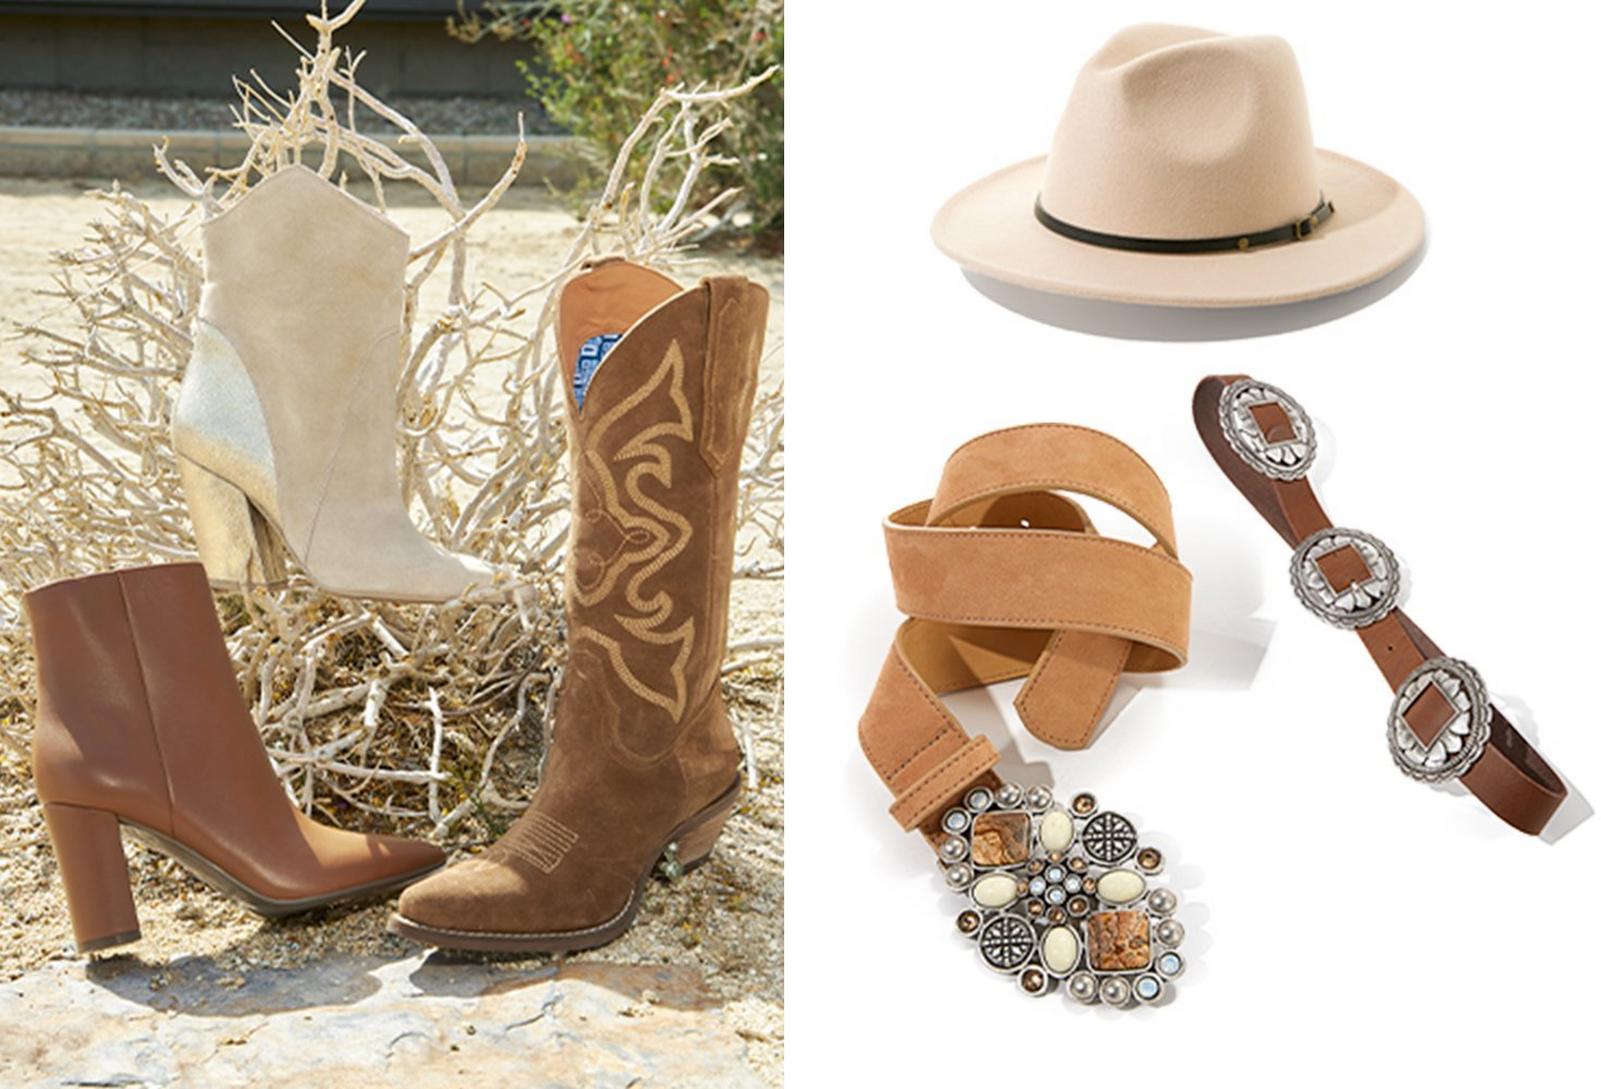 left side featuring three types of bohemian boots. right side featuring an embellished belt, a brown belt, and a tan hat.